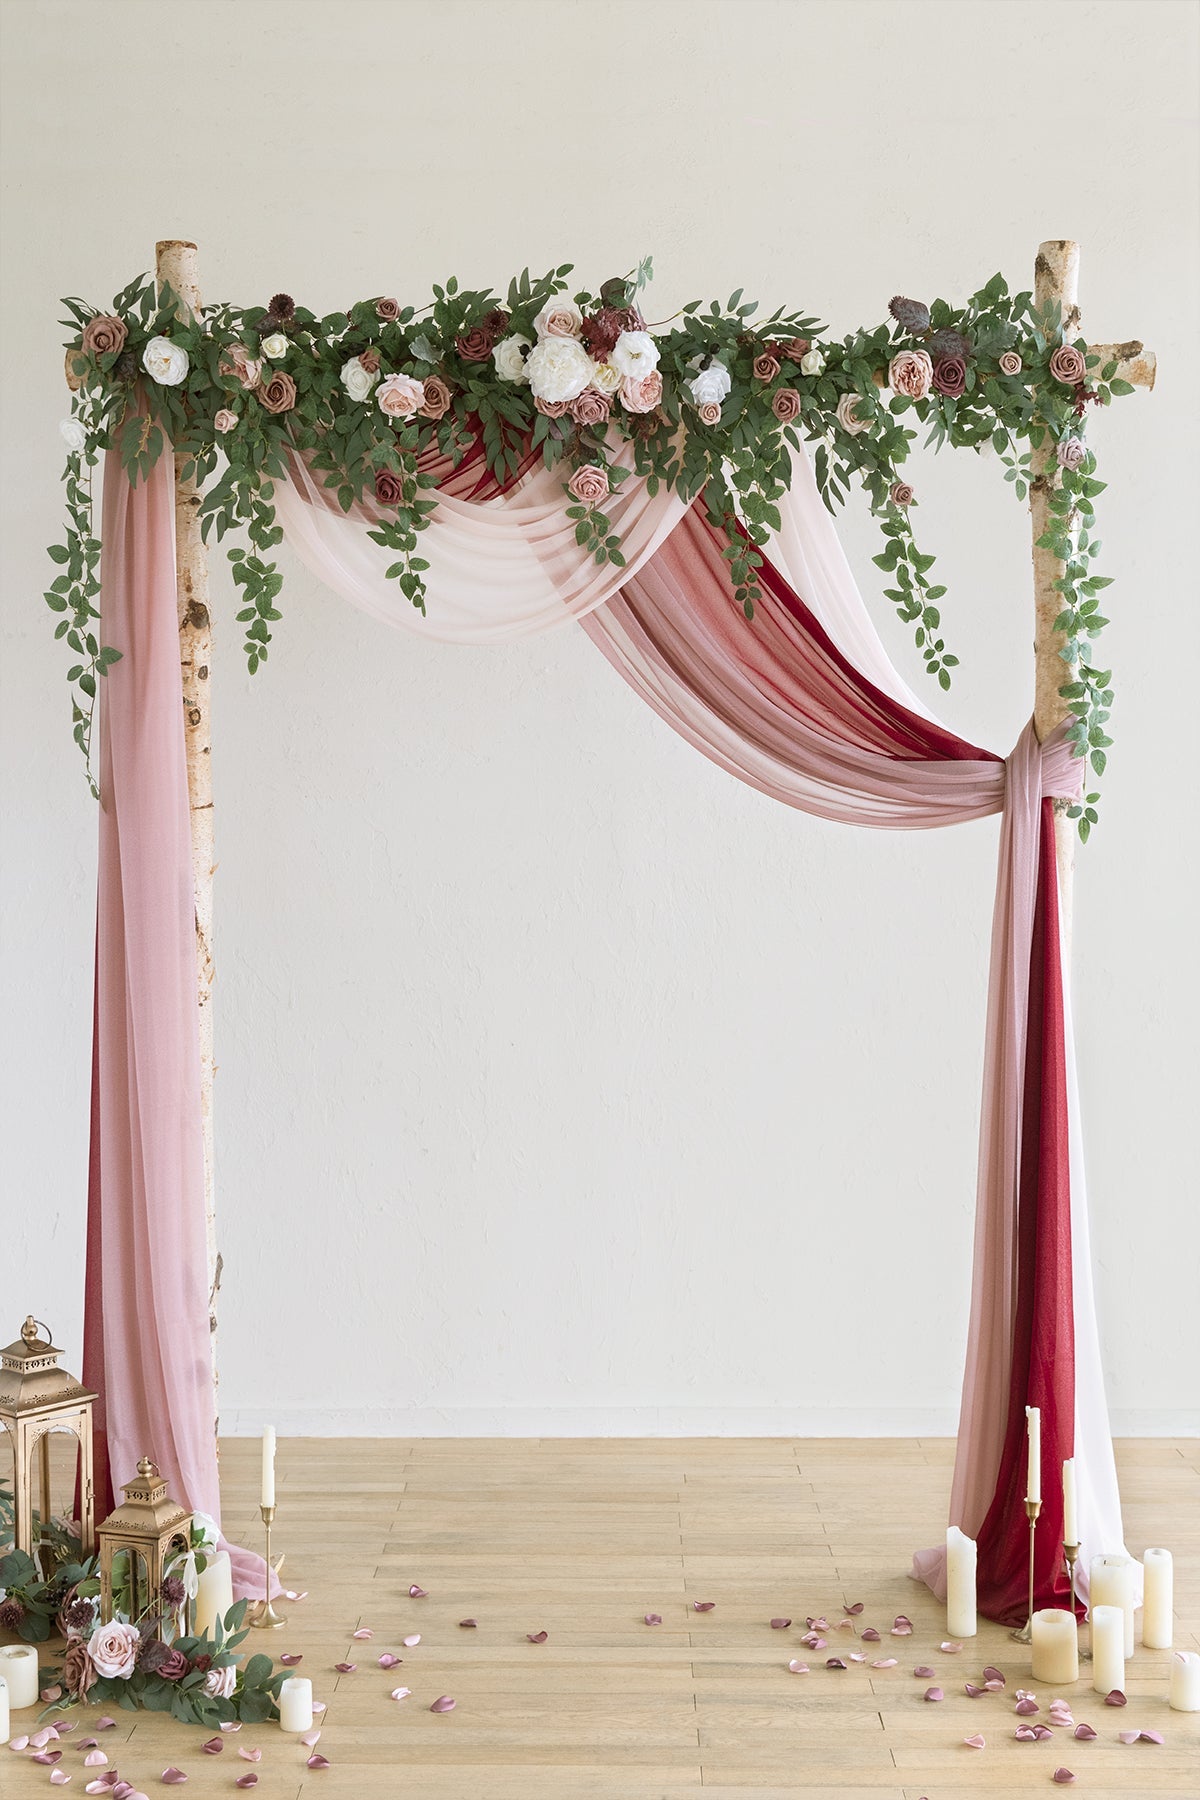 Wedding Arch Drapes in Rich Burgundy | Clearance